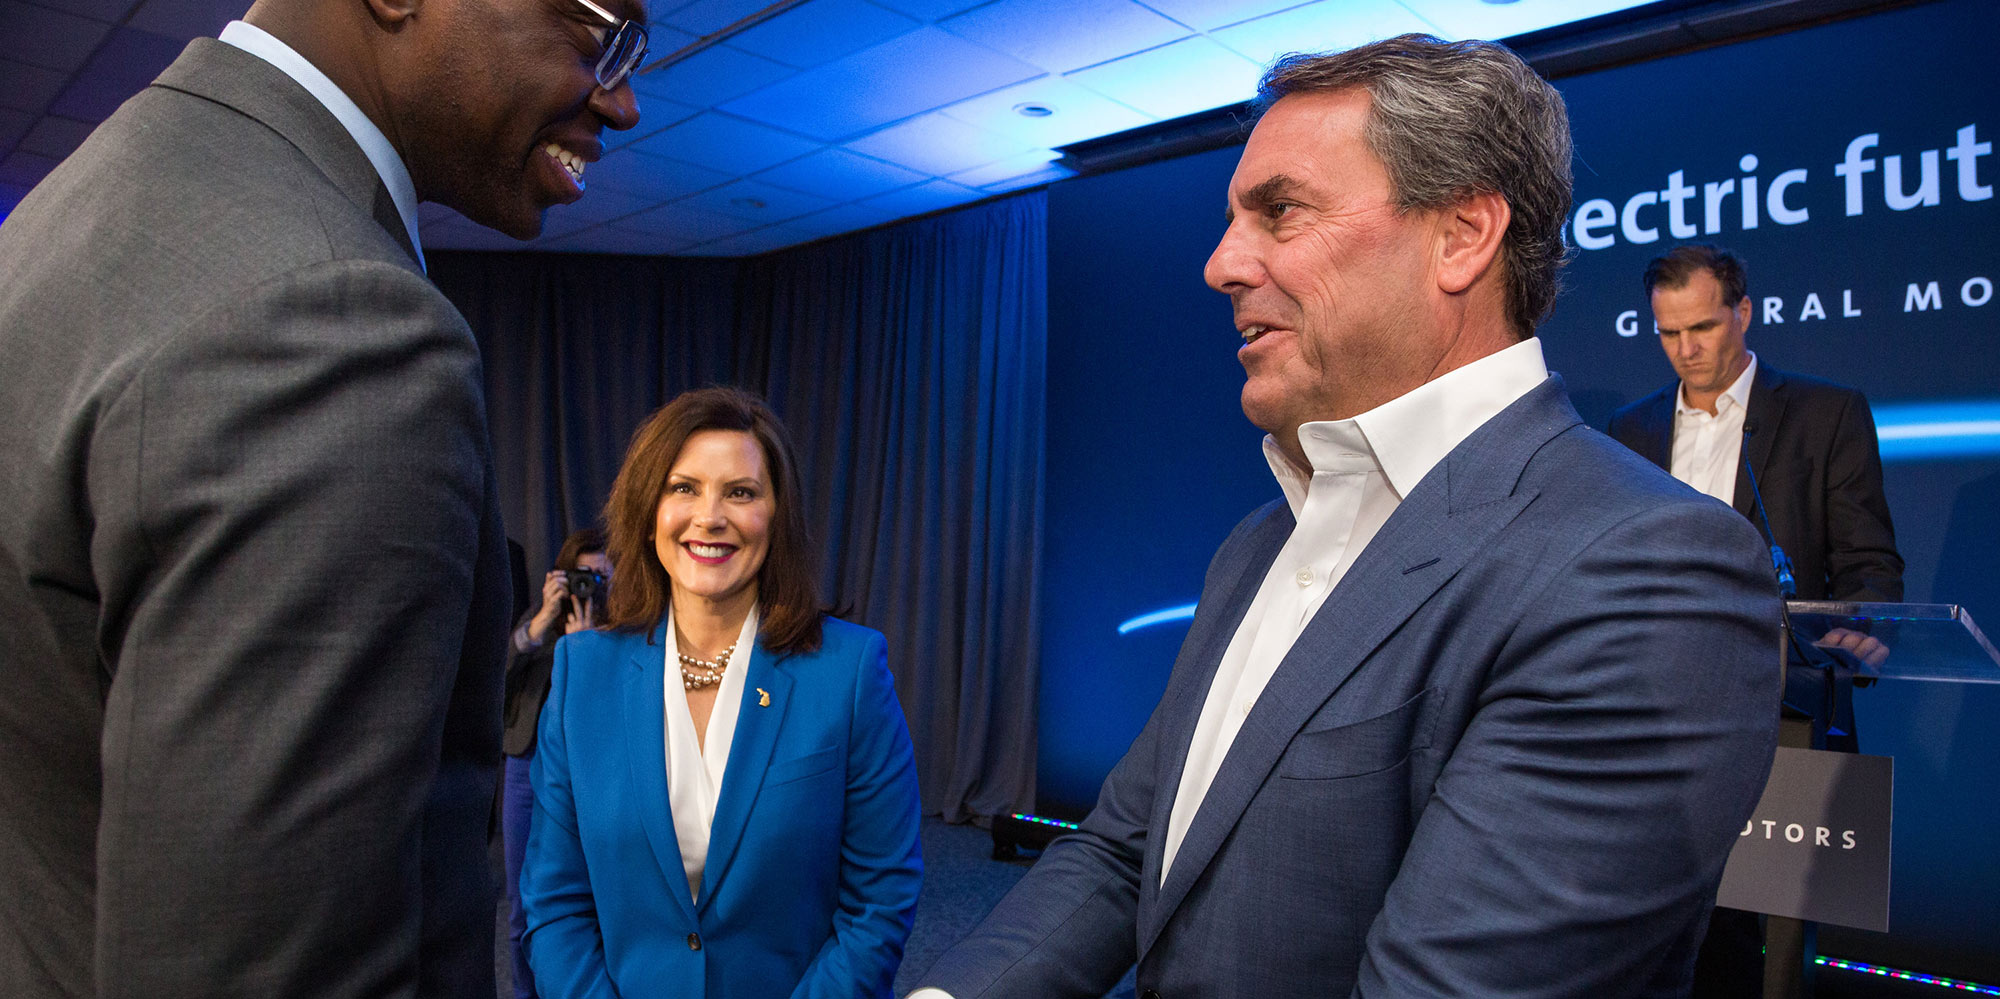 GM President Mark Reuss greets Michigan Lt. Governor Garlin Gilchrist and Michigan Governor Gretchen Whitmer at the GM Detroit- Hamtramck plant.